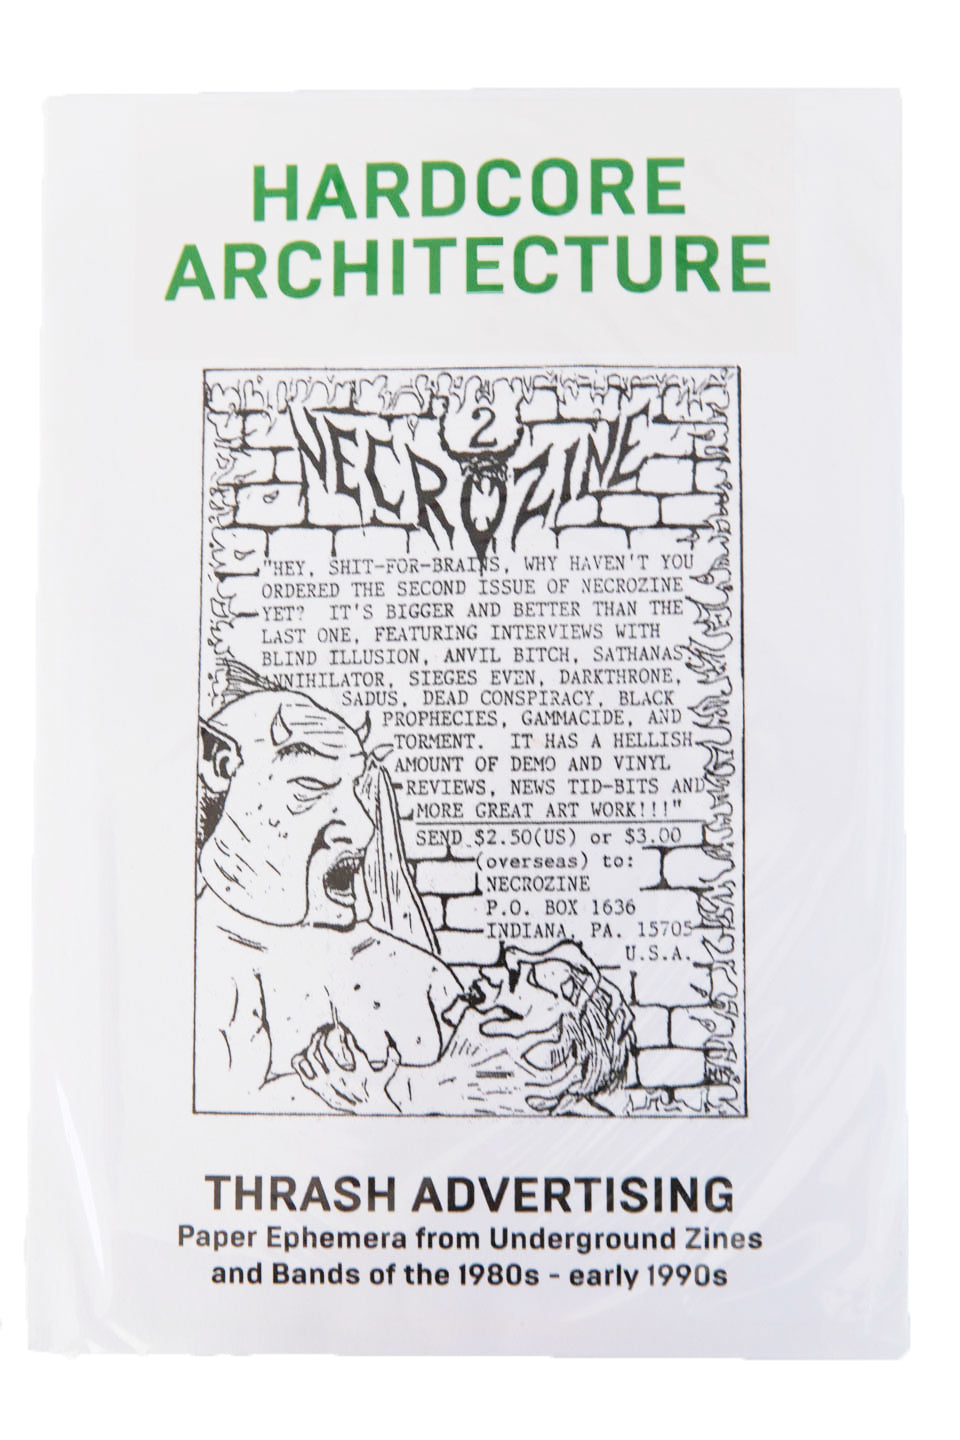 HARDCORE ARCHITECTURE | Thrash Advertising, Paper Ephemera from Underground Zines and Bands of the 1980s - early 1990s